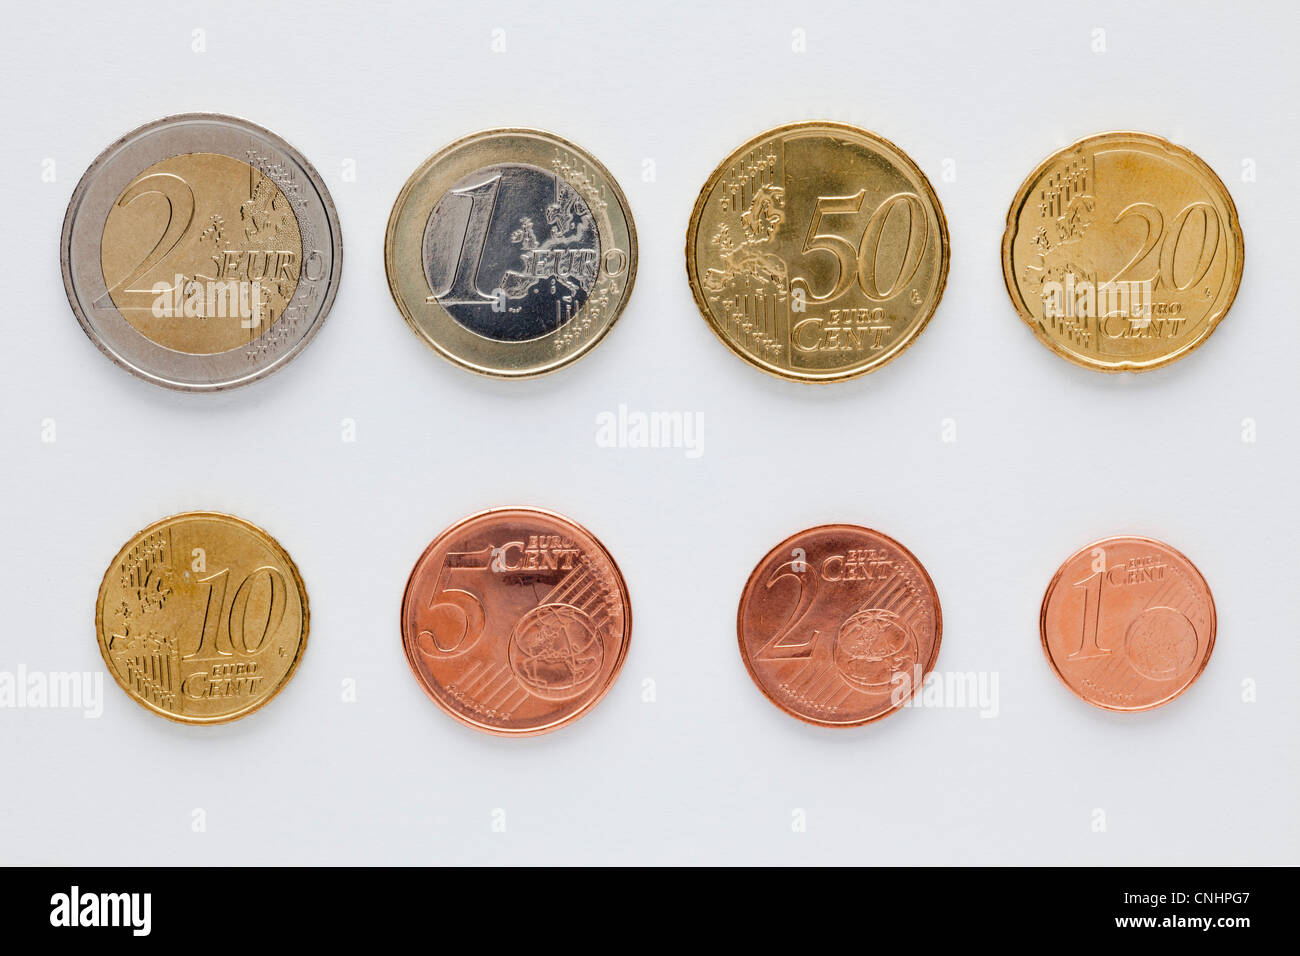 Euro coins arranged in numerical order, front view Stock Photo